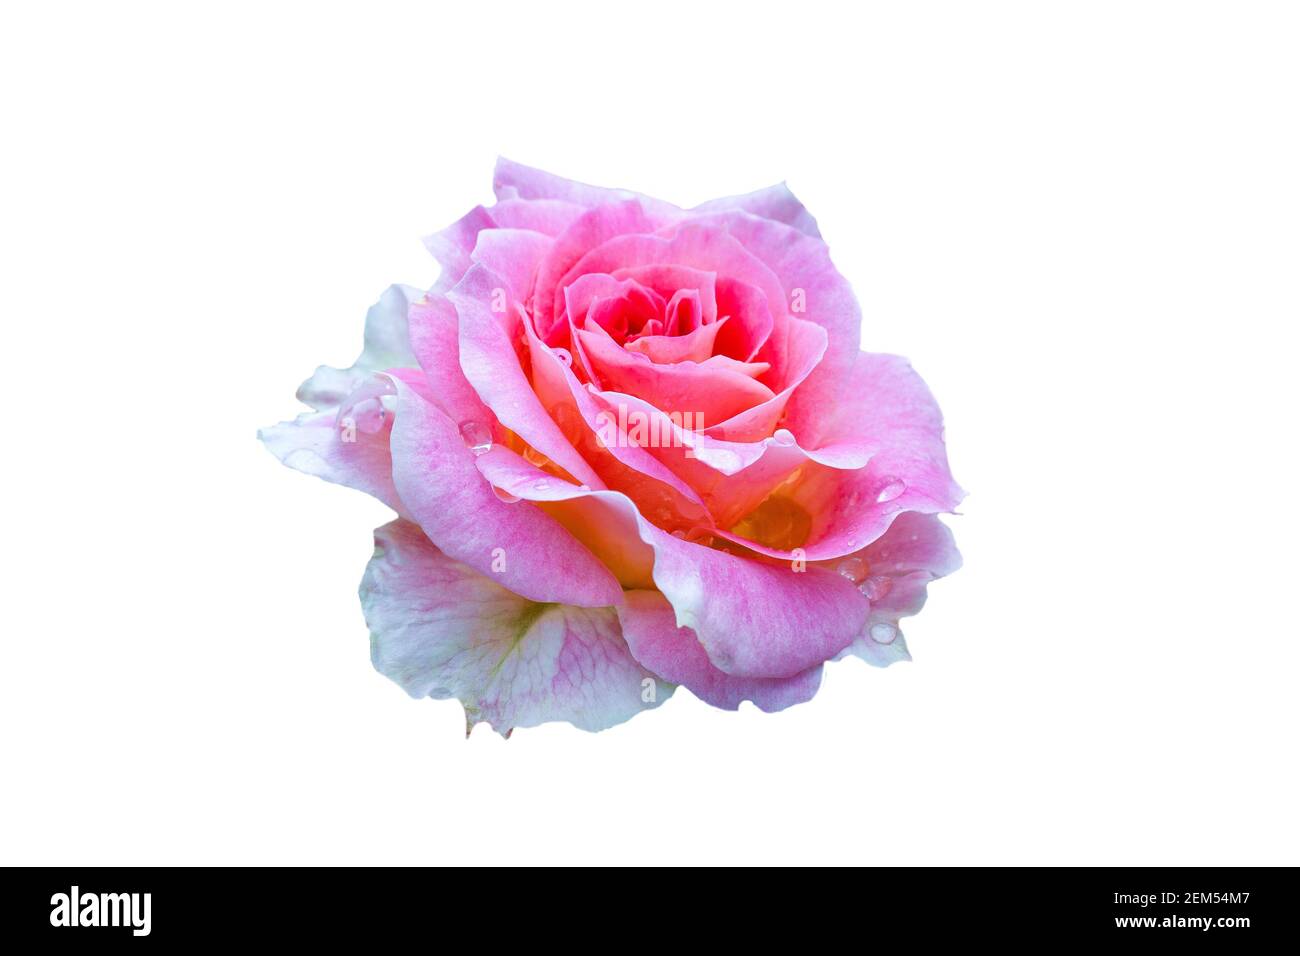 Fully open, gently pink with many shades lovely rose plant flower, isolate Stock Photo